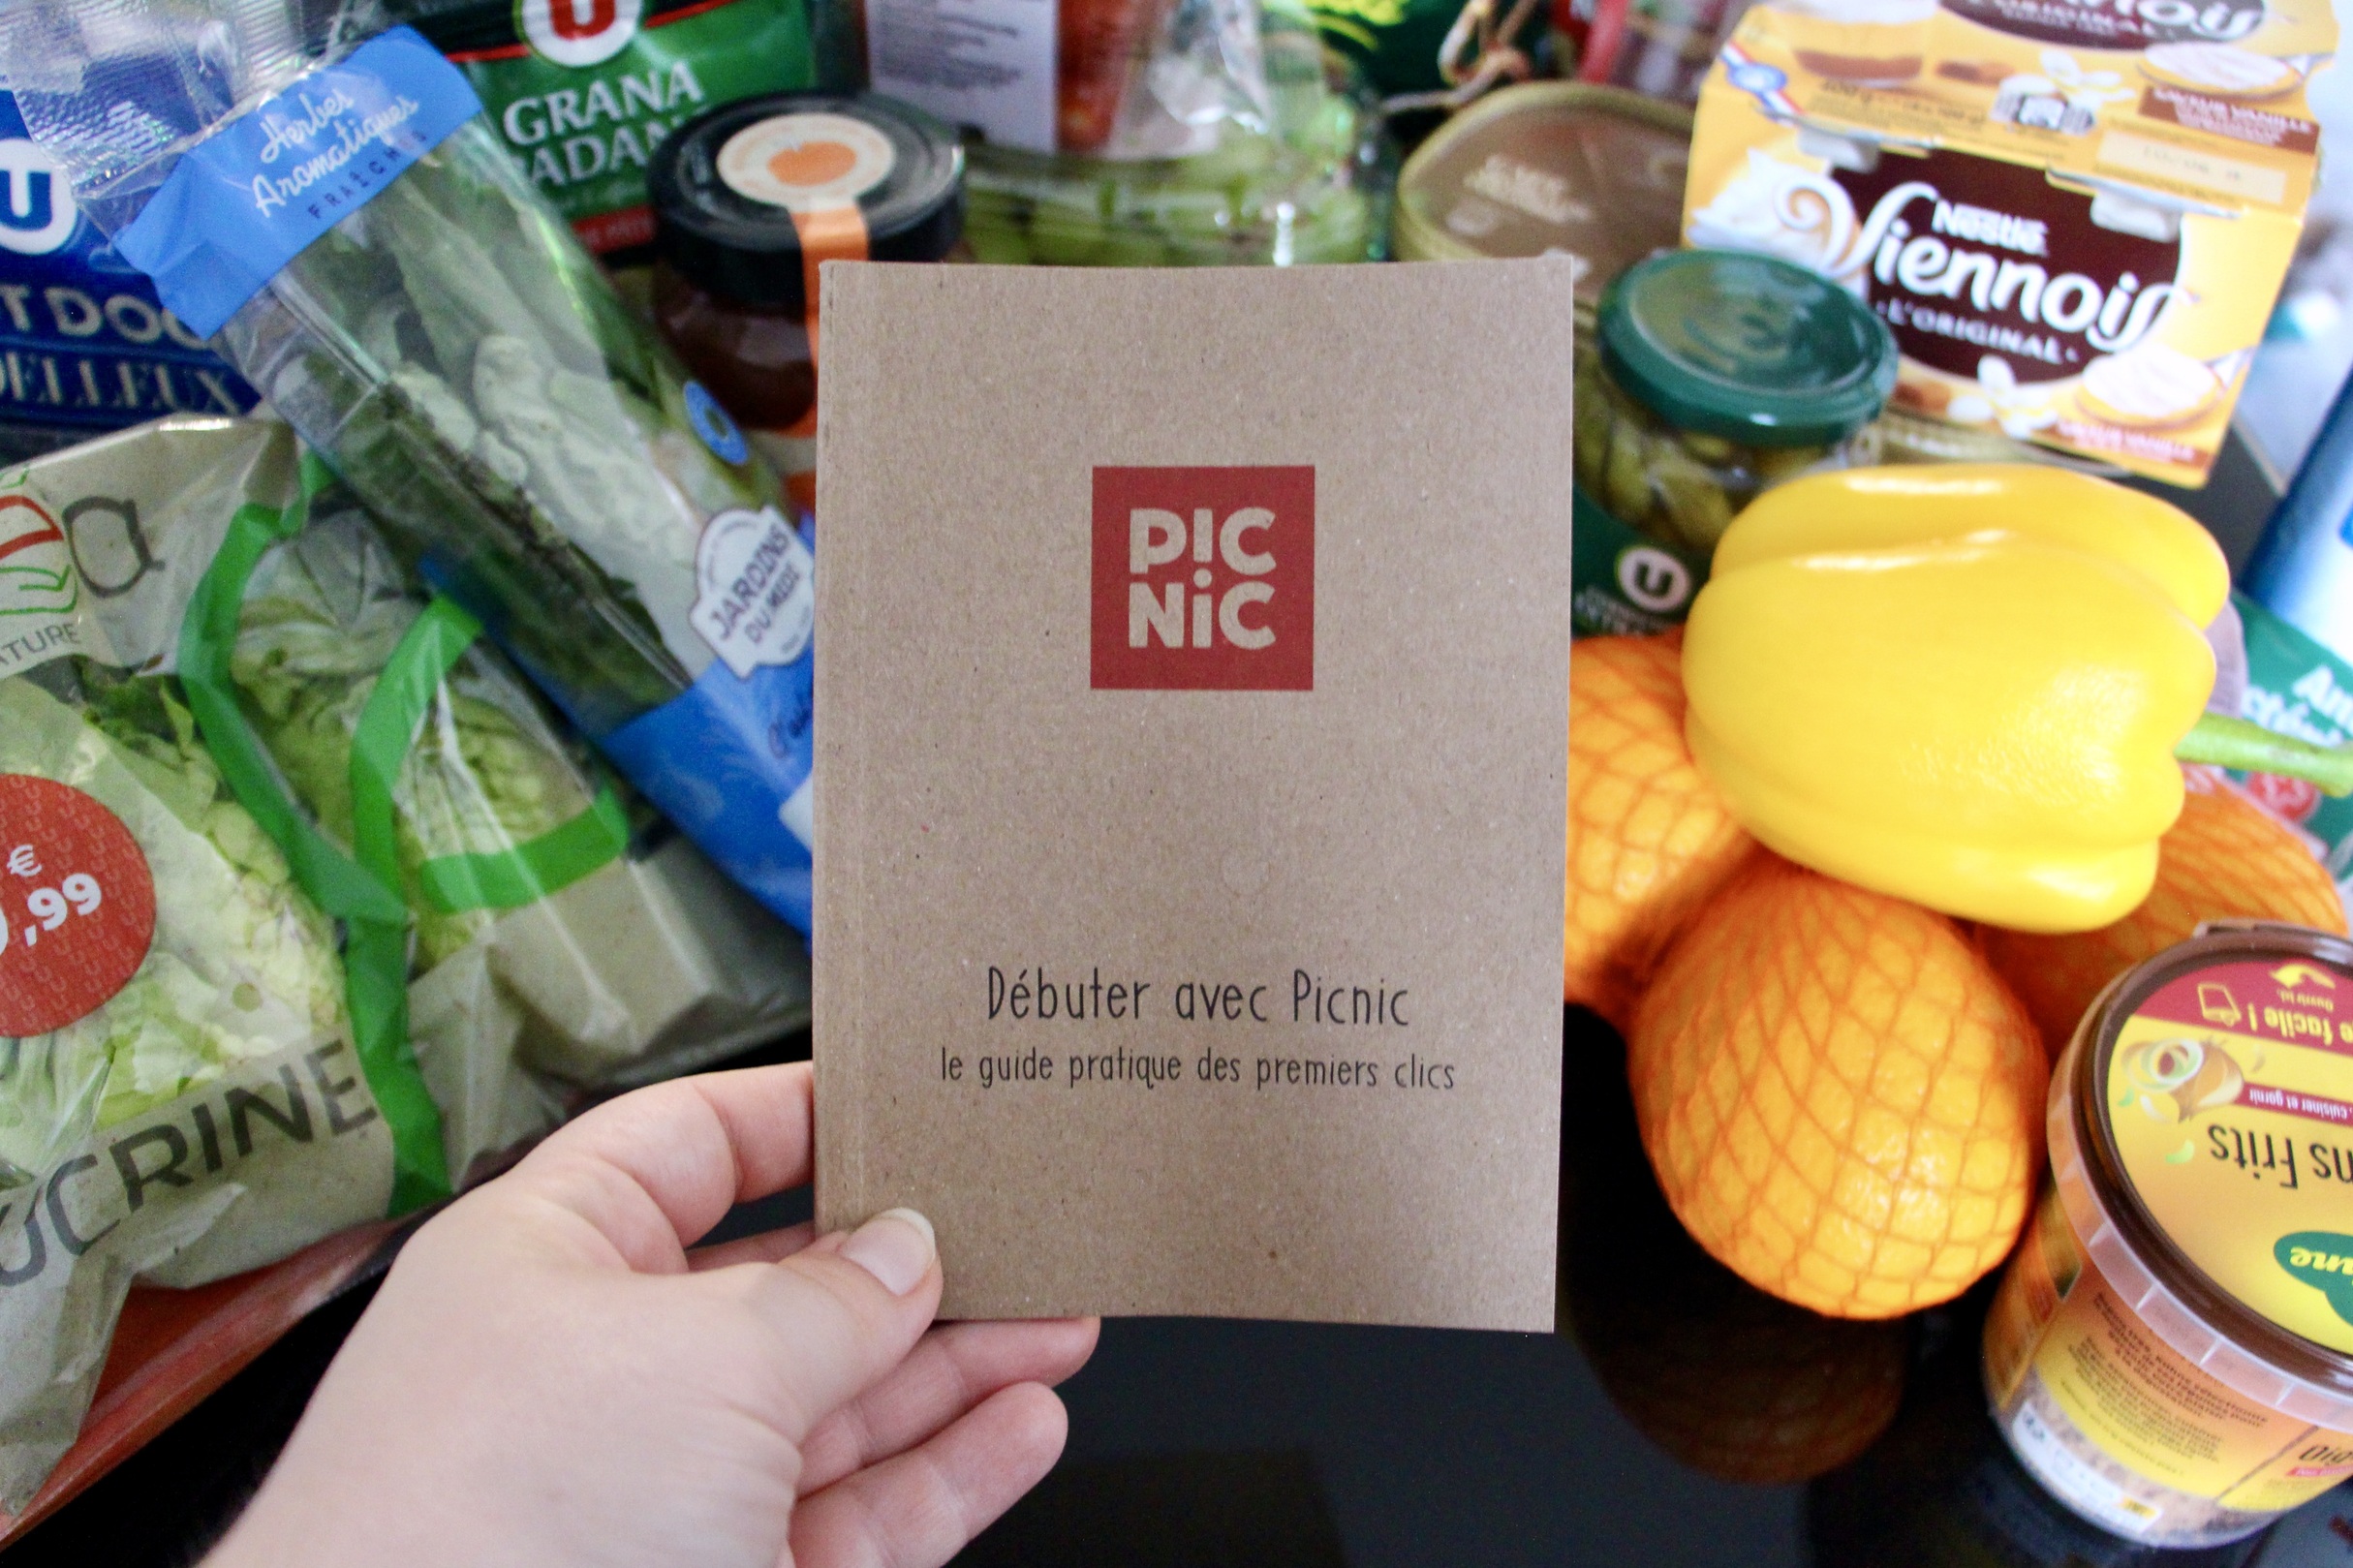 Picnic booklet surrounded by grocery items.